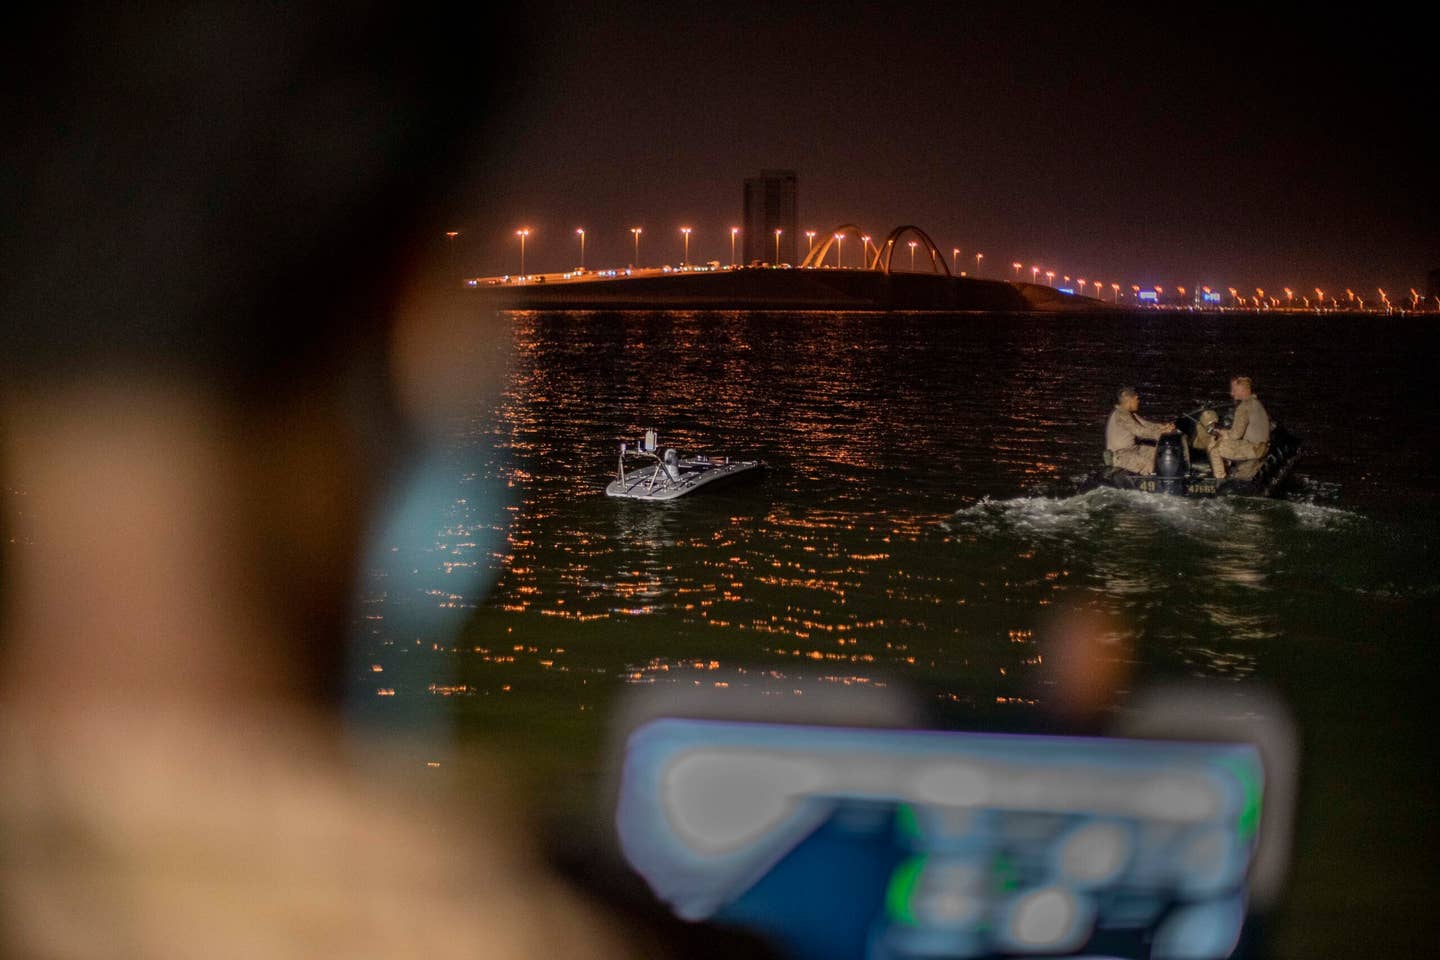 Marines assigned to the All Domain Reconnaissance Detachment, 11th Marine Expeditionary Unit, operate a MANTAS T12 USV during training with Task Force 59 at Naval Support Activity Bahrain, Oct. 28, 2022. <em>Credit: U.S. Marine Corps photo by Sgt. Seth Rosenberg</em>